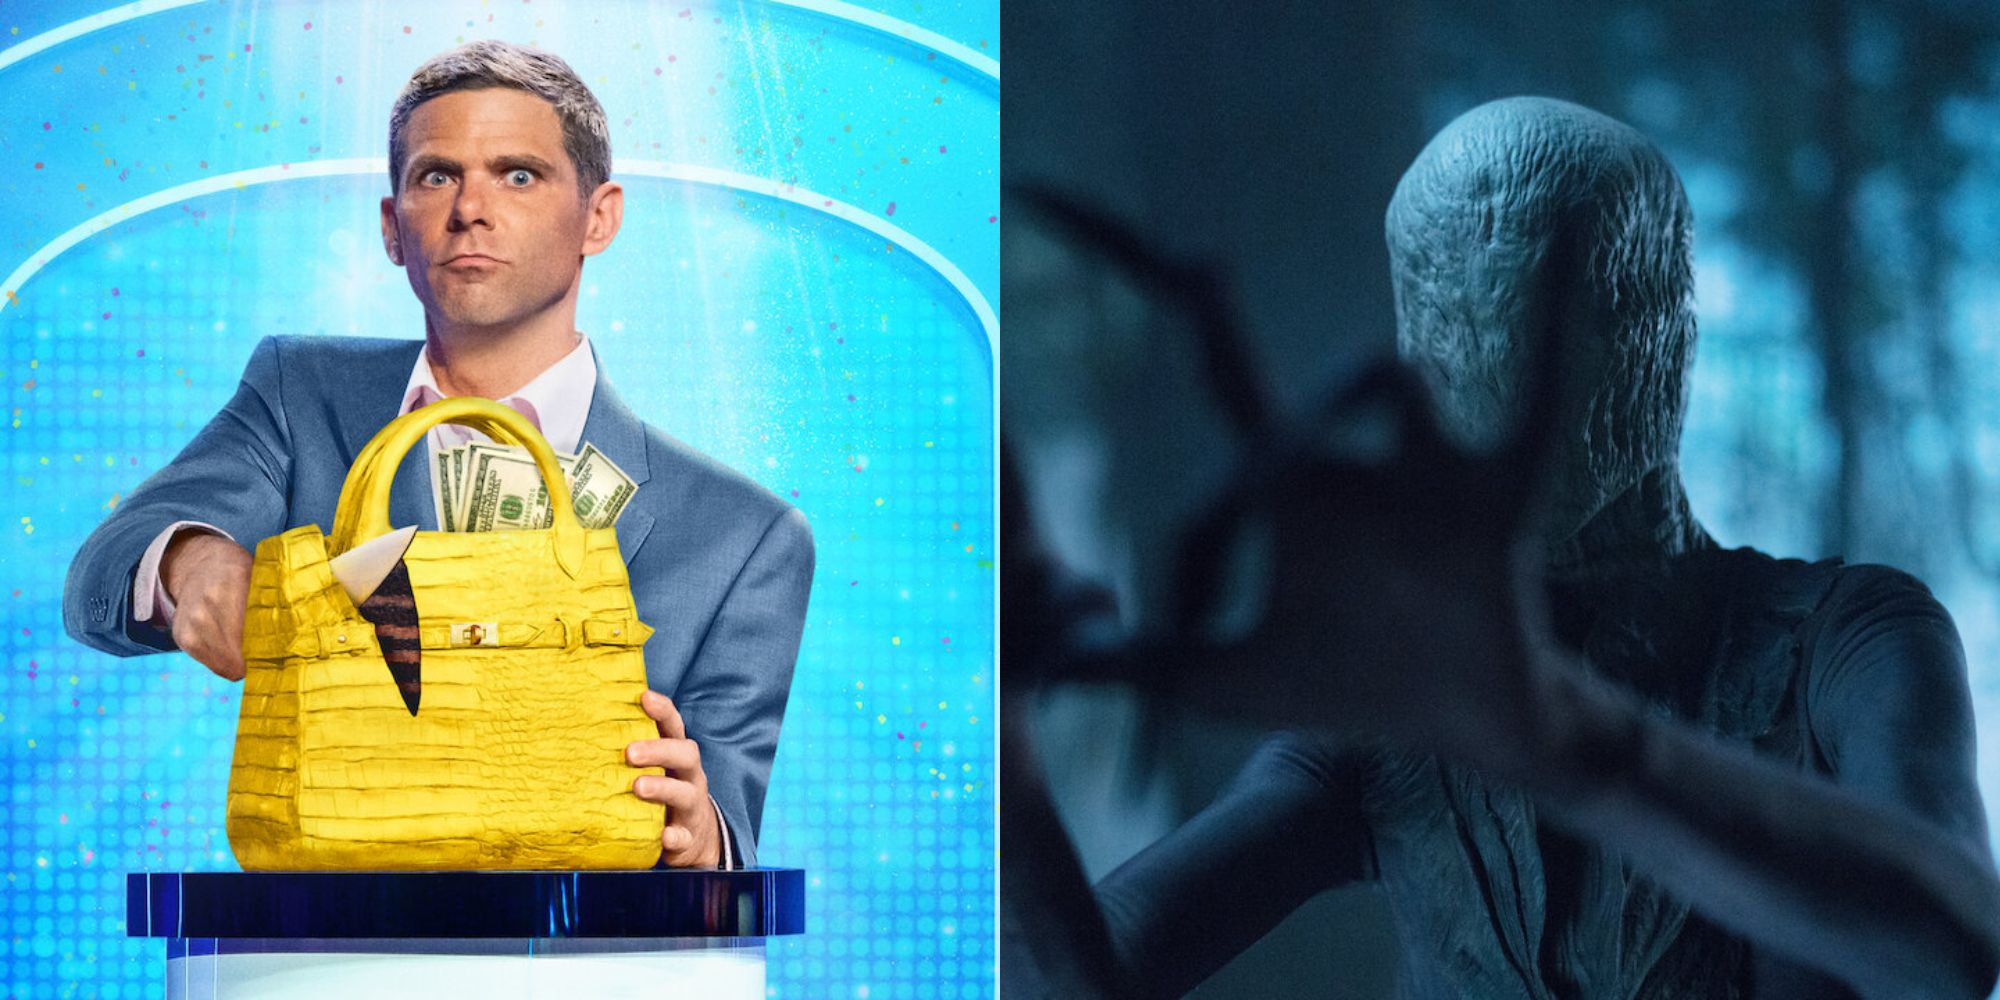 Split image showing Mikey Day in Is It Cake and Slender Man in the 2018 film Slender Man